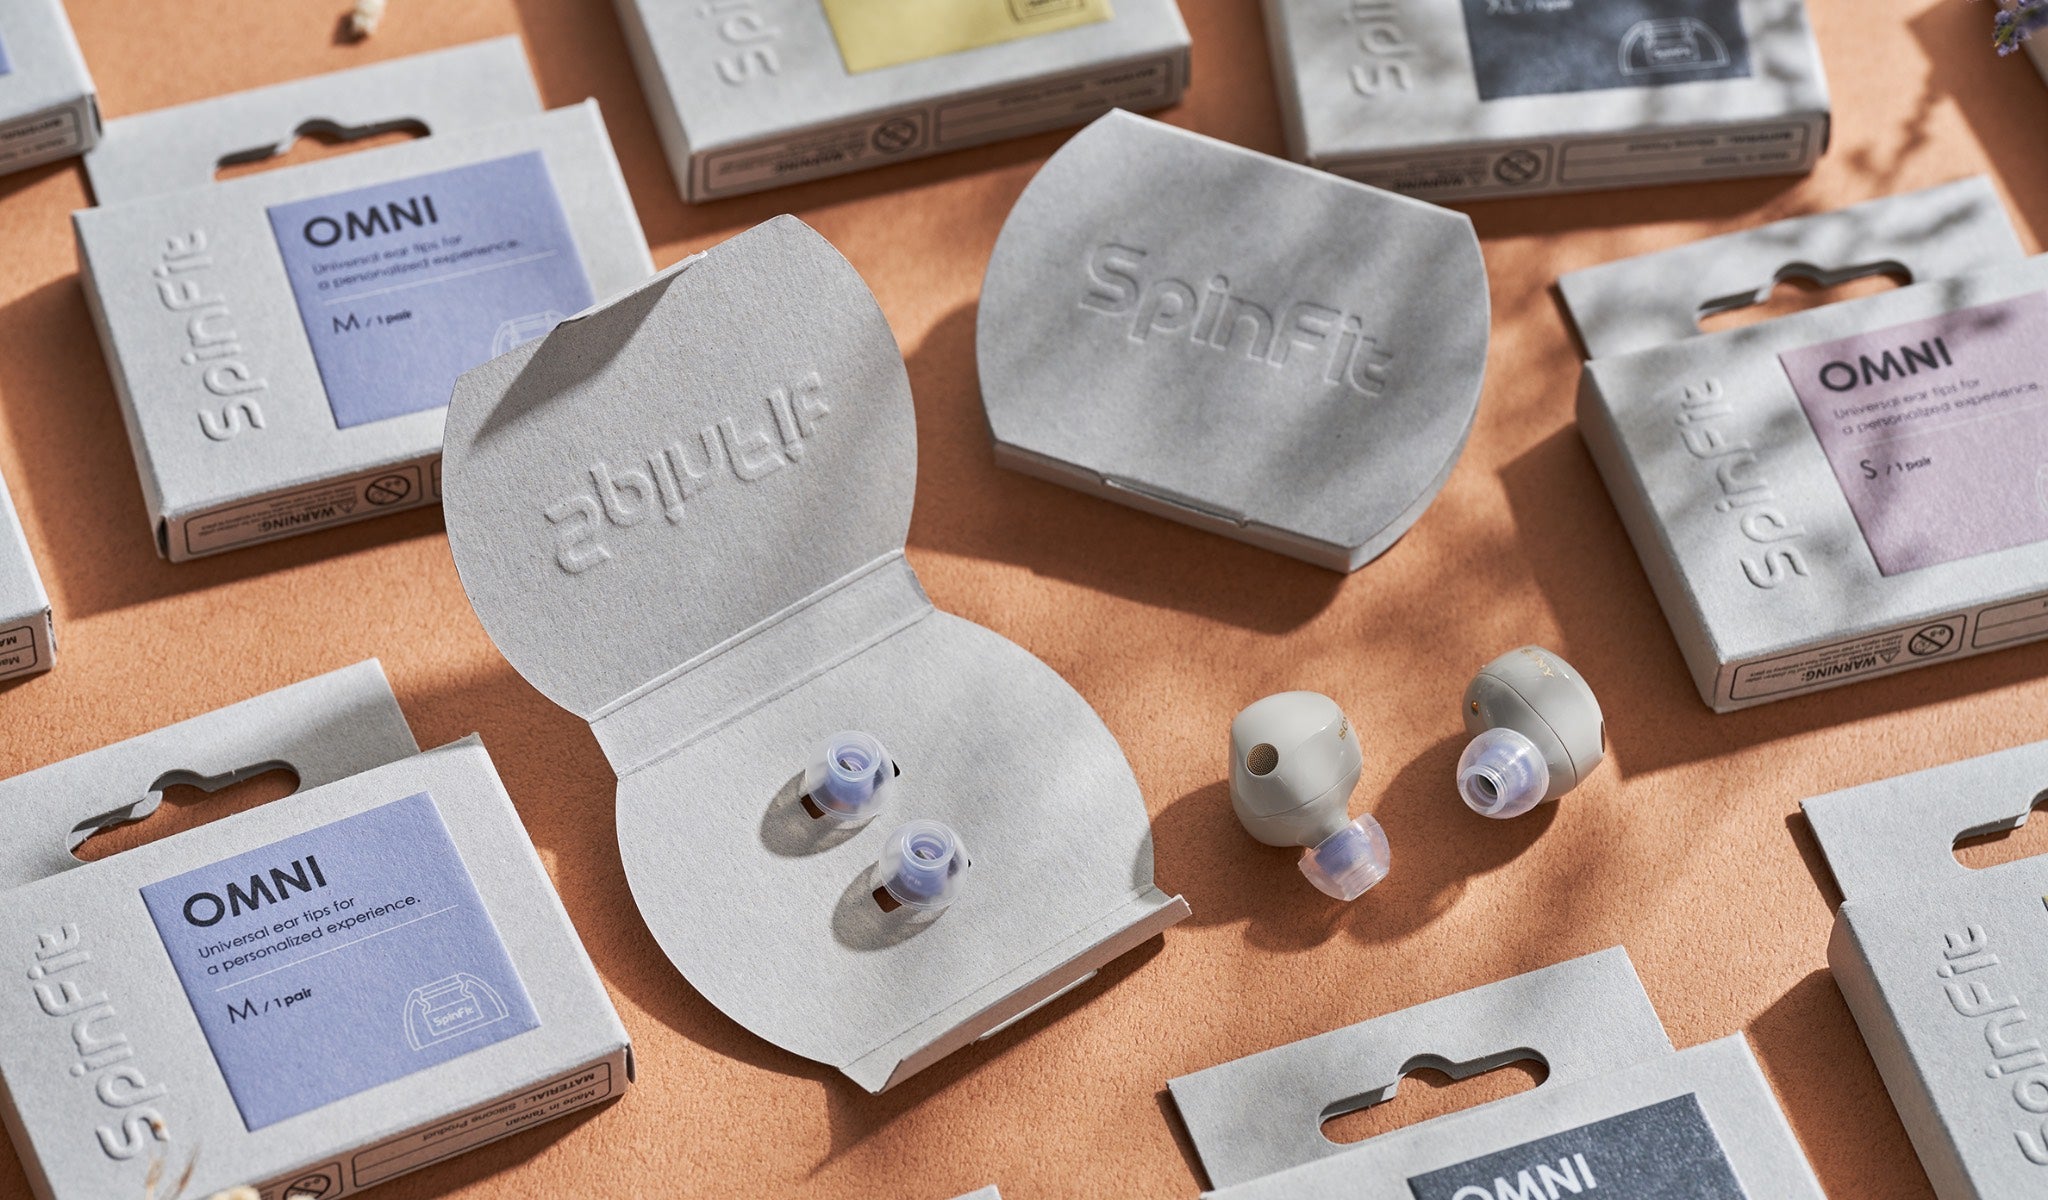 SpinFit retail boxes and inserts highlighting tips and plastic-free, recycled paper design